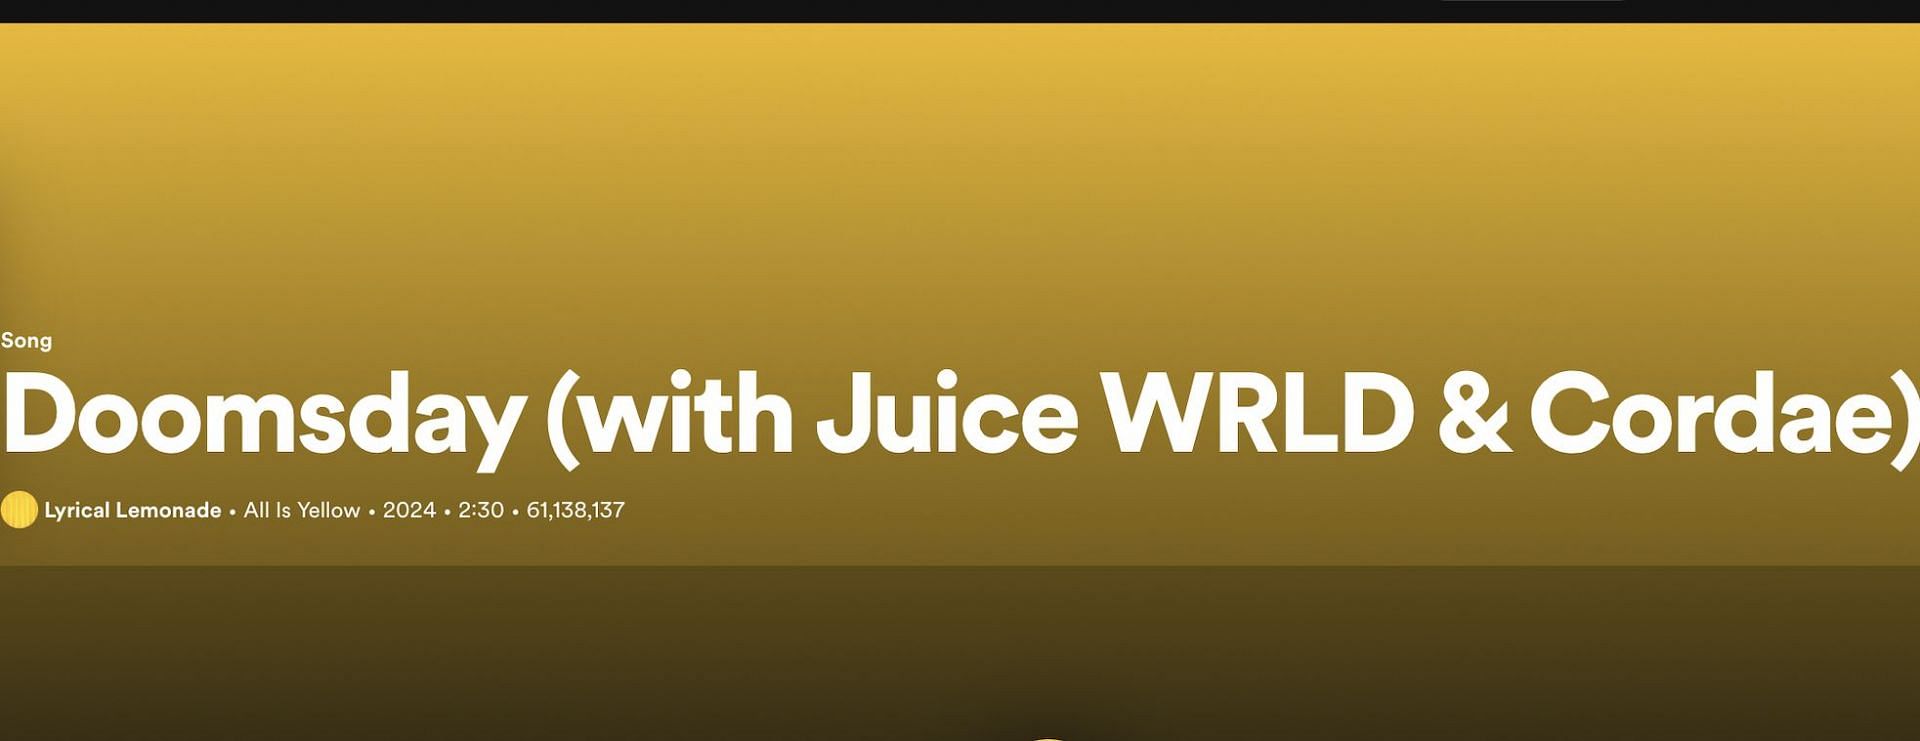 Track 8 from Lyrical Lemonade&#039;s All Is Yellow (Image via Spotify)